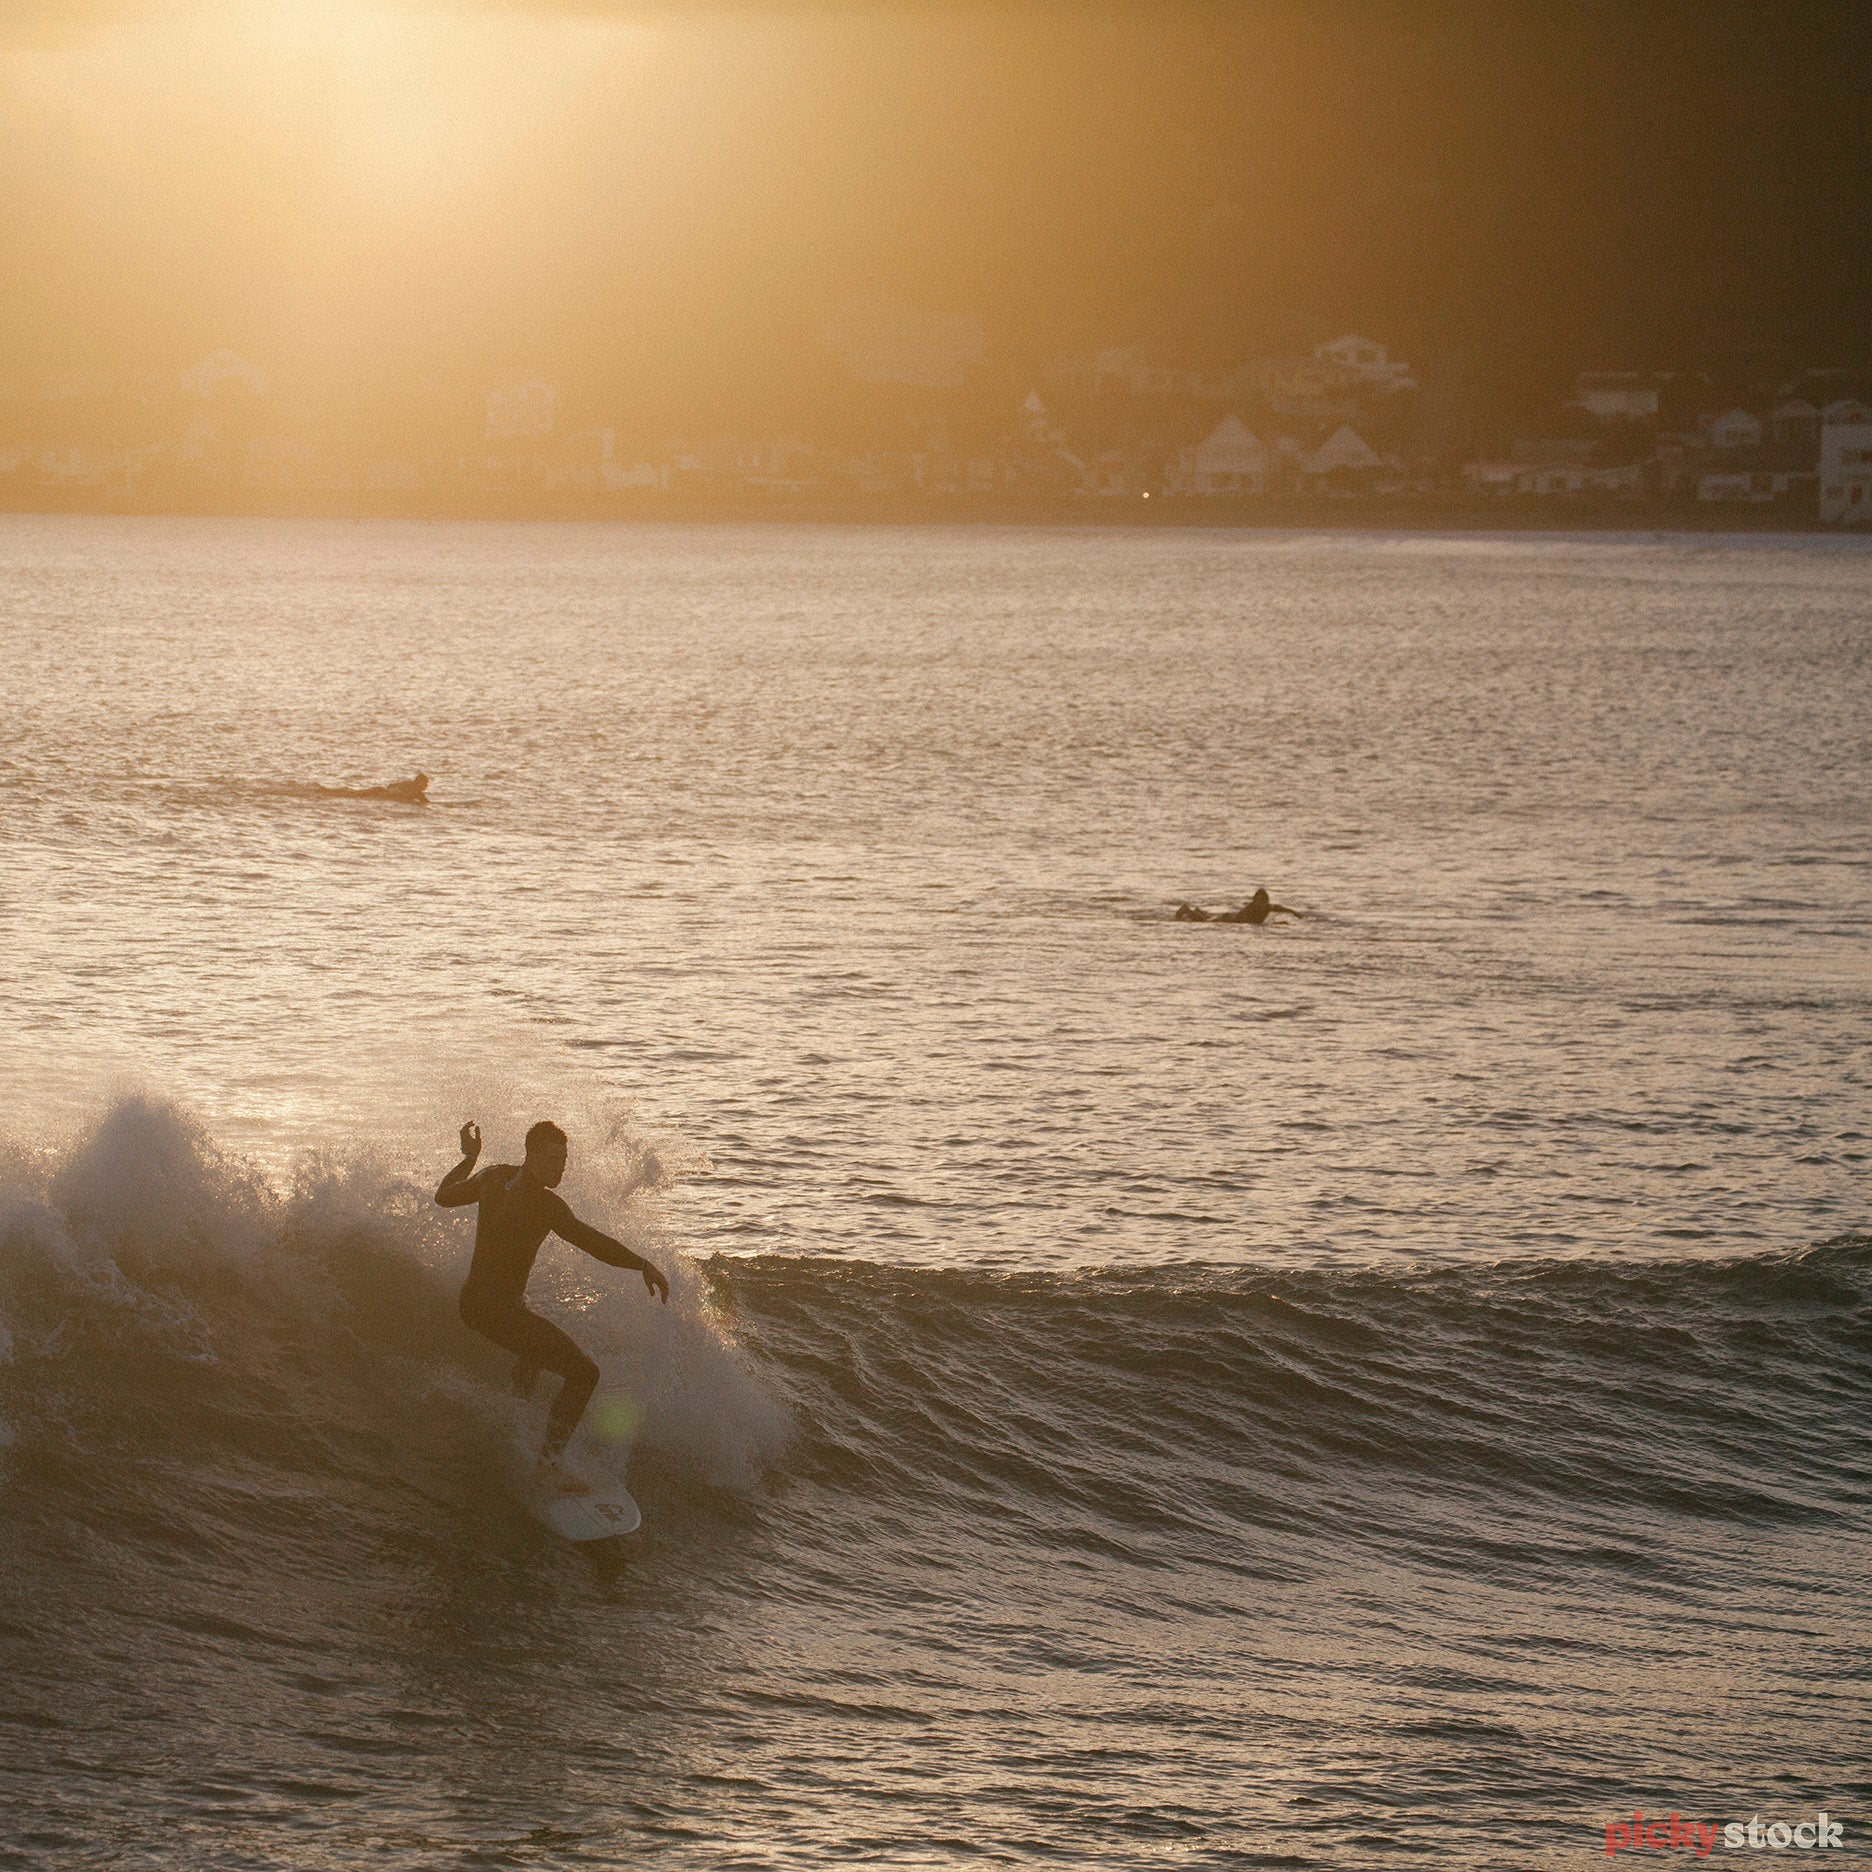 Surfing the waves of Lyall Bay at sunrise. Beach and coastal homes in the background. 